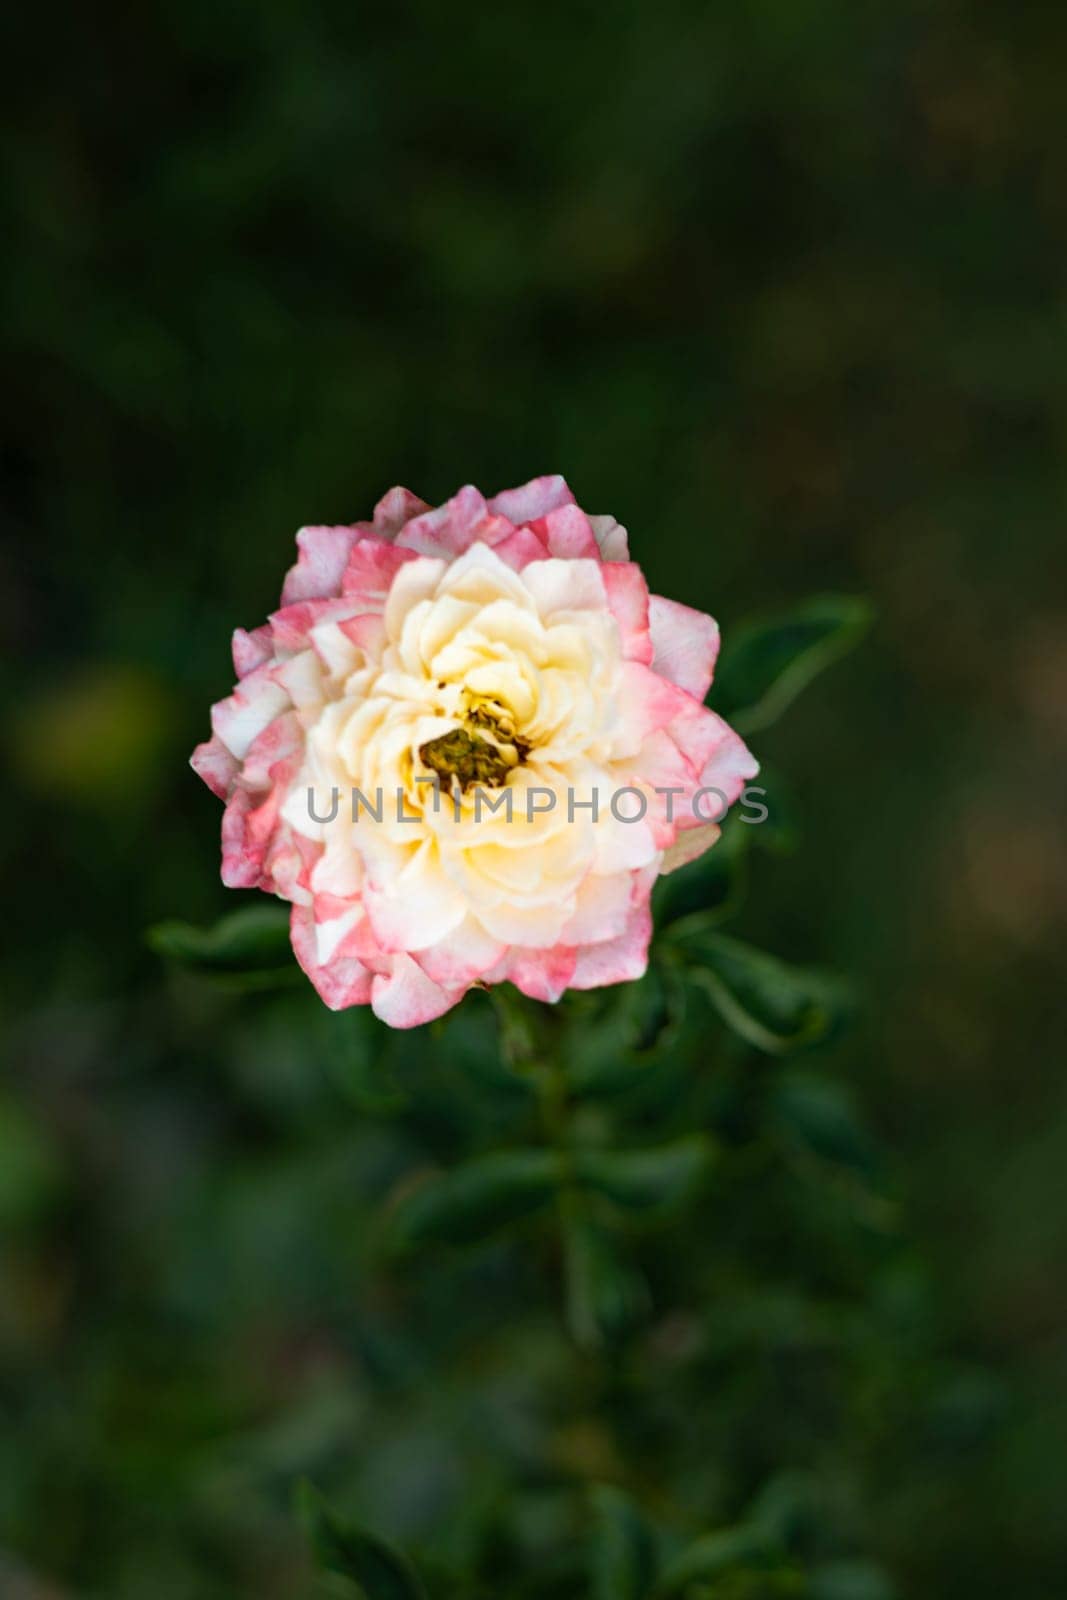 Close-up of pink and white roses in garden. Surrealistic dreamy outdoor photo of a pink white shining rose on blurred natural background.